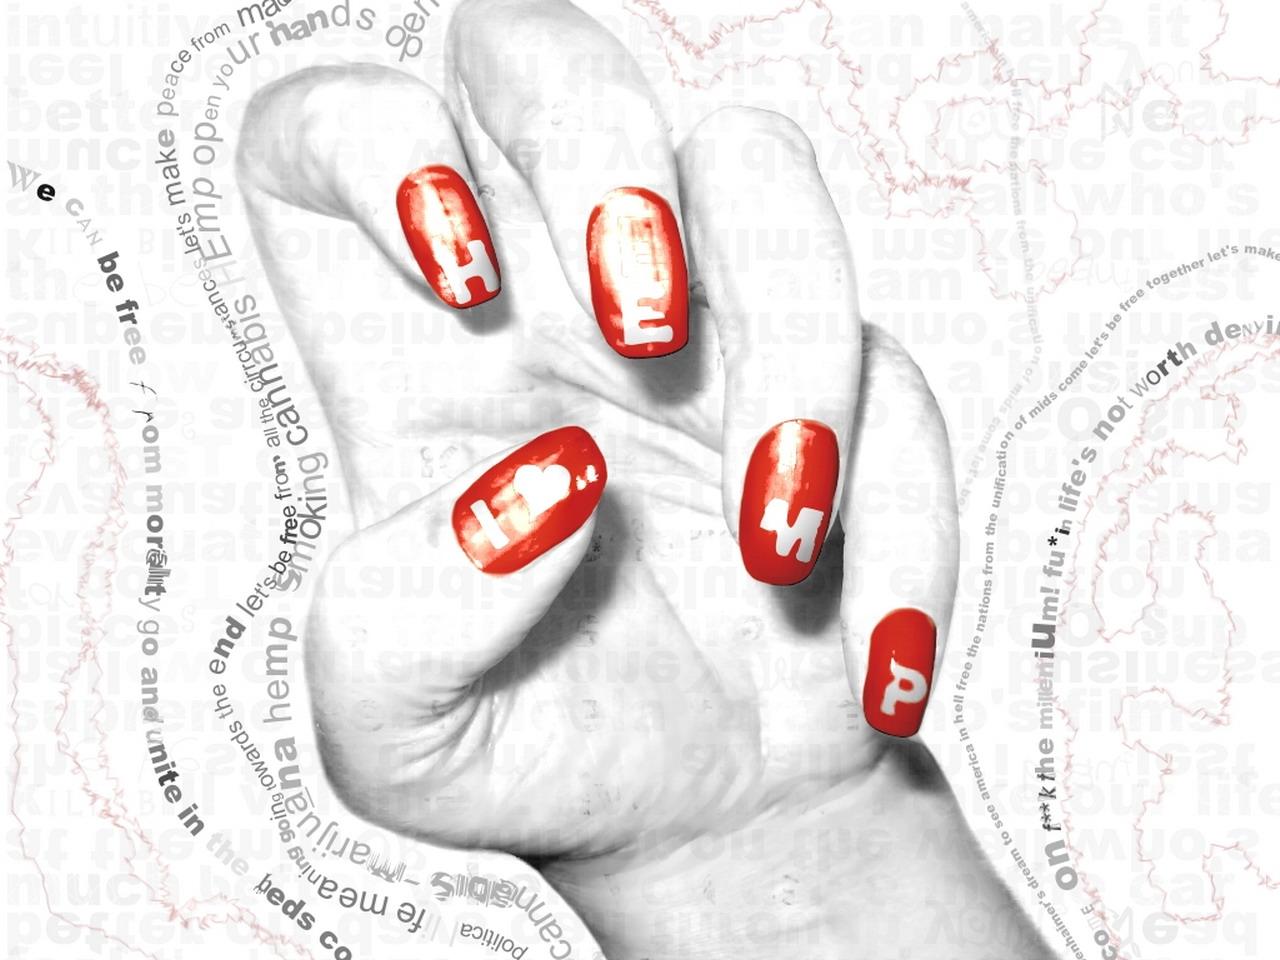 Hand with red nails wallpaper. Hand with red nails